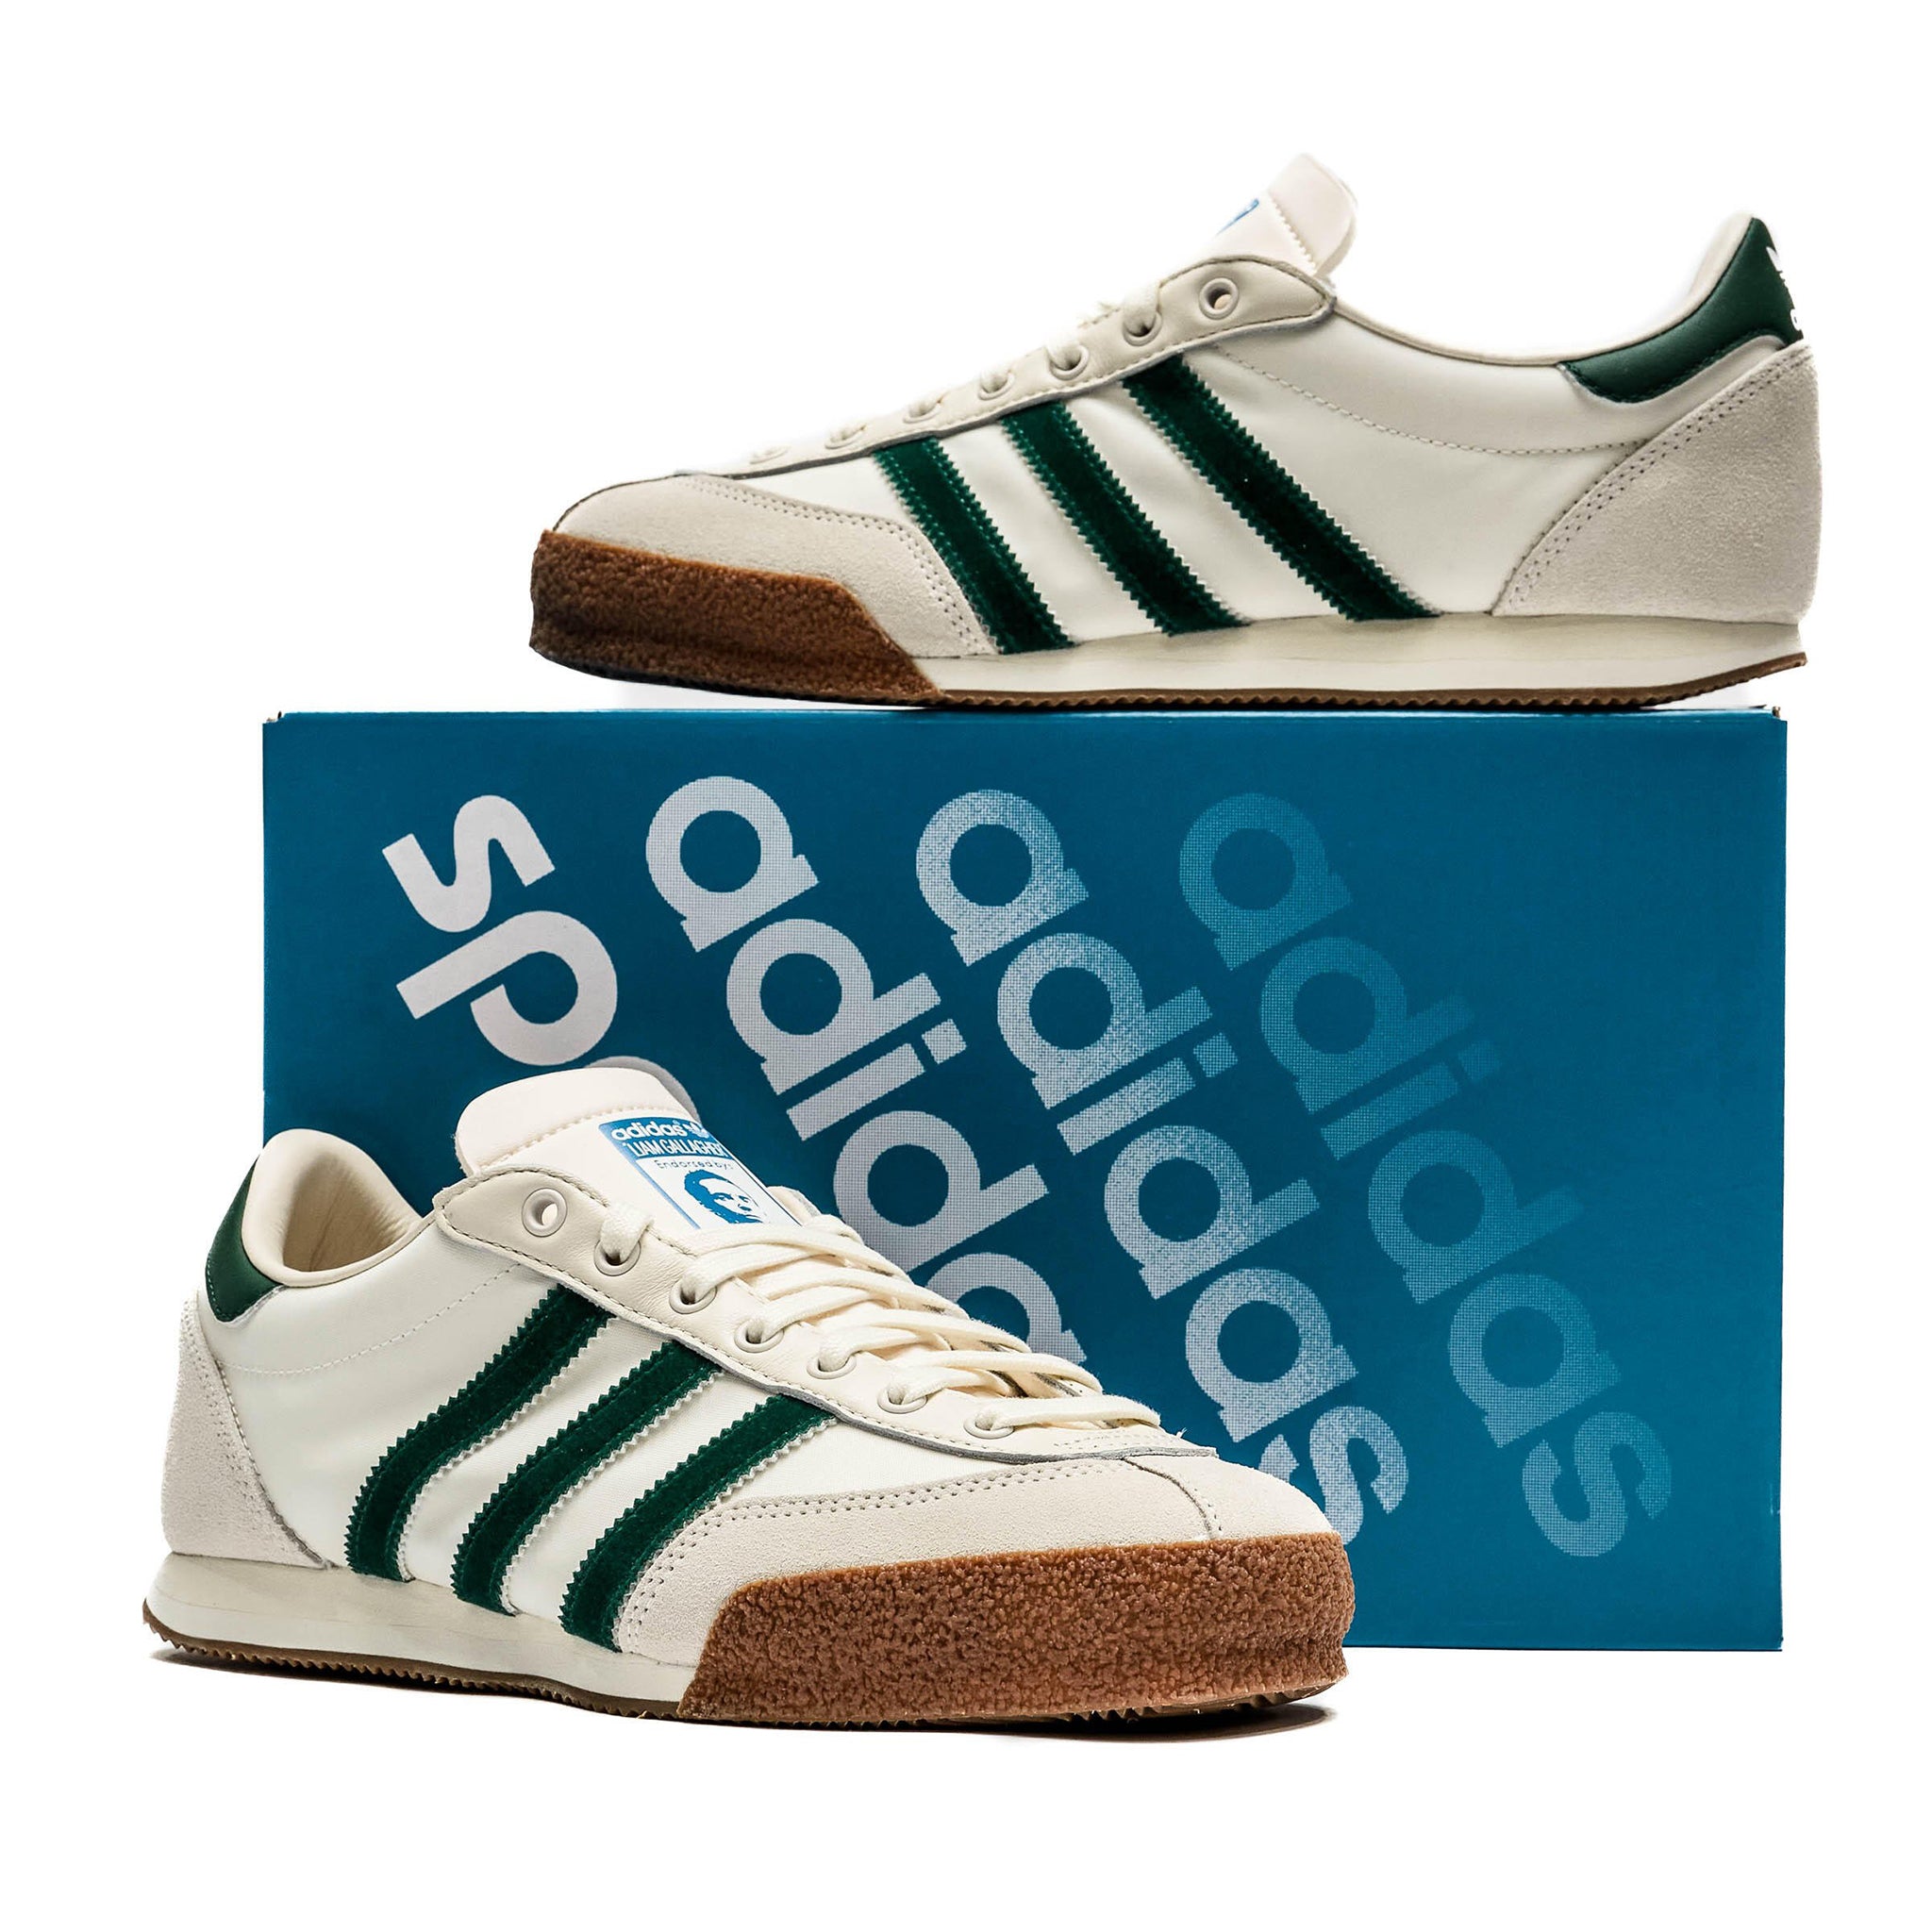 Box View of Liam Gallagher x Adidas Spezial LG2 Bottle Green IF8358